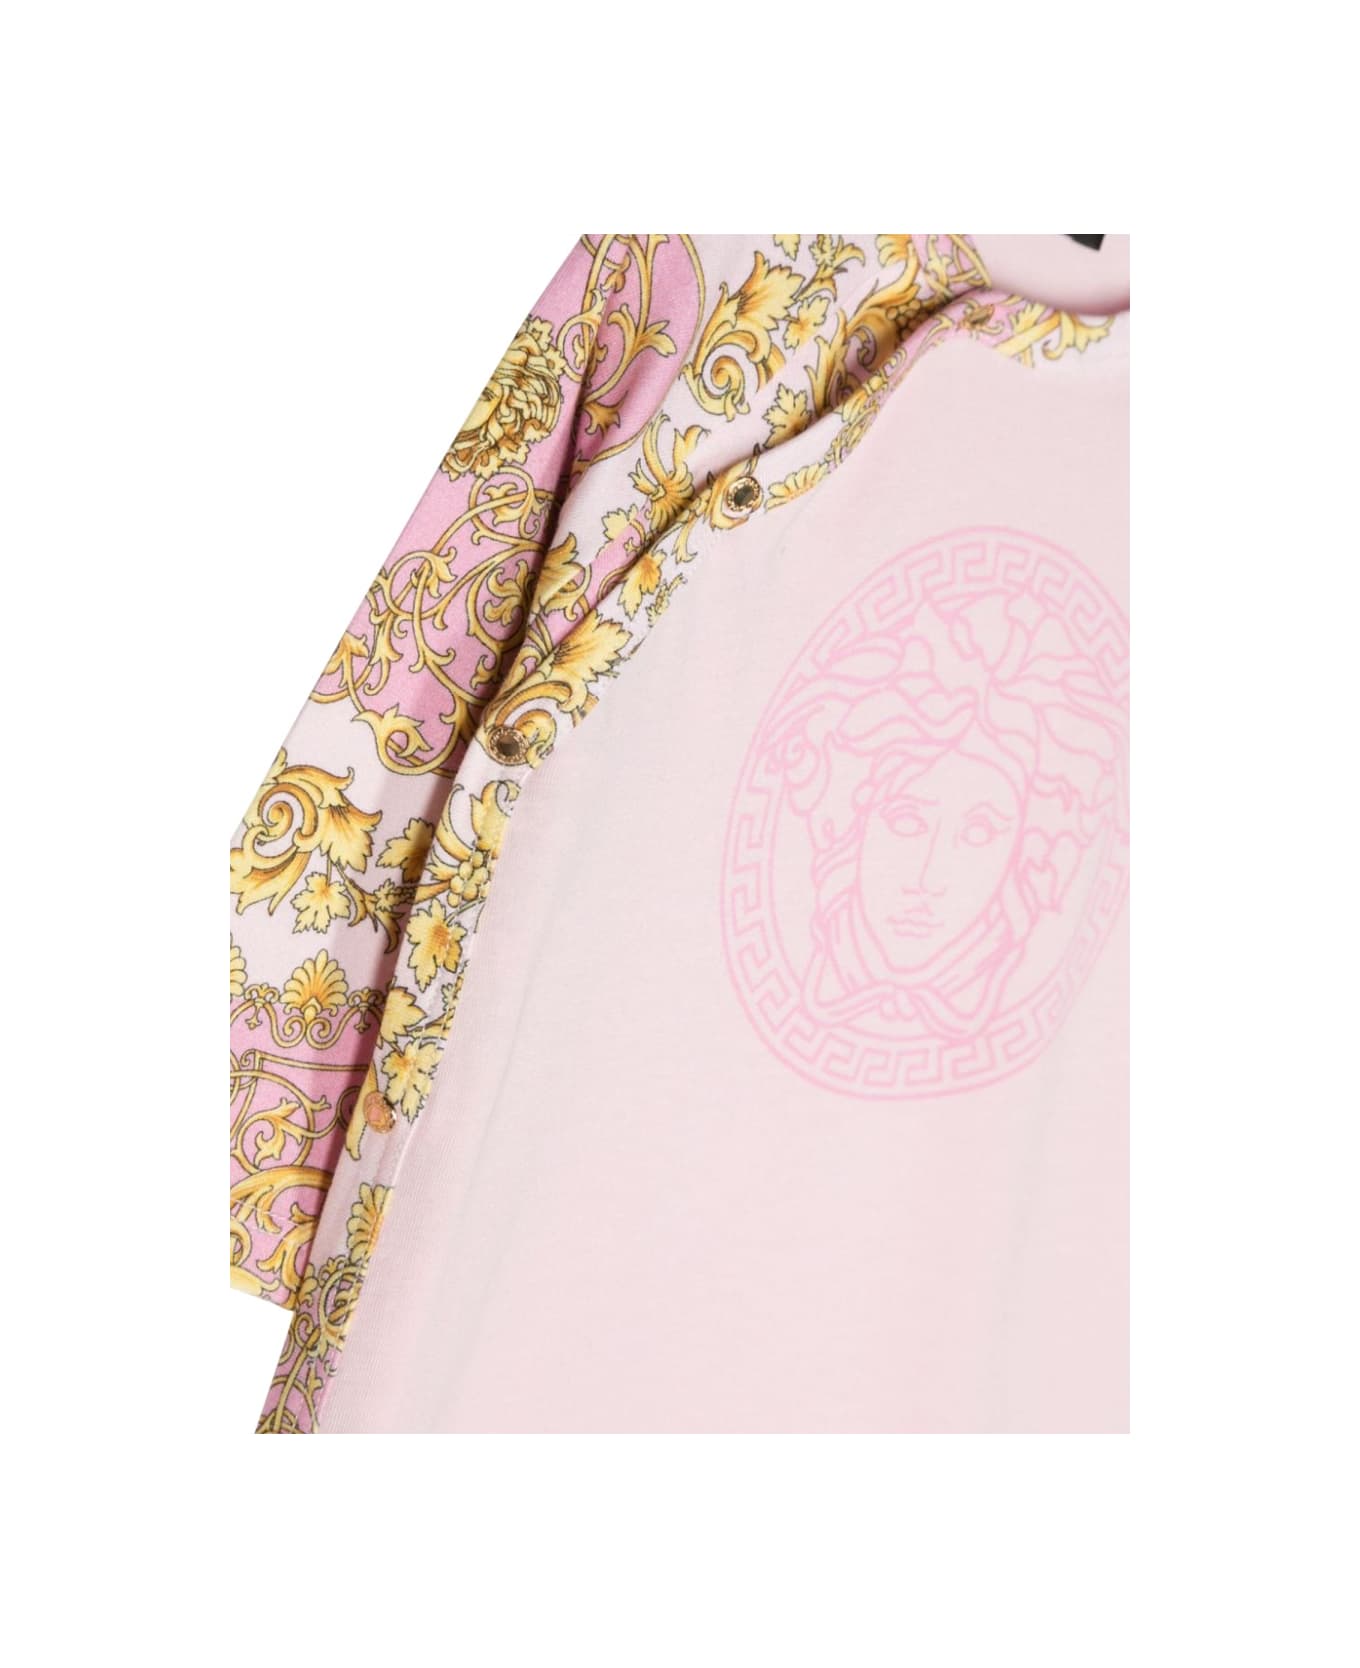 Versace Frenzy Baroque Jumpsuit - PINK ボディスーツ＆セットアップ